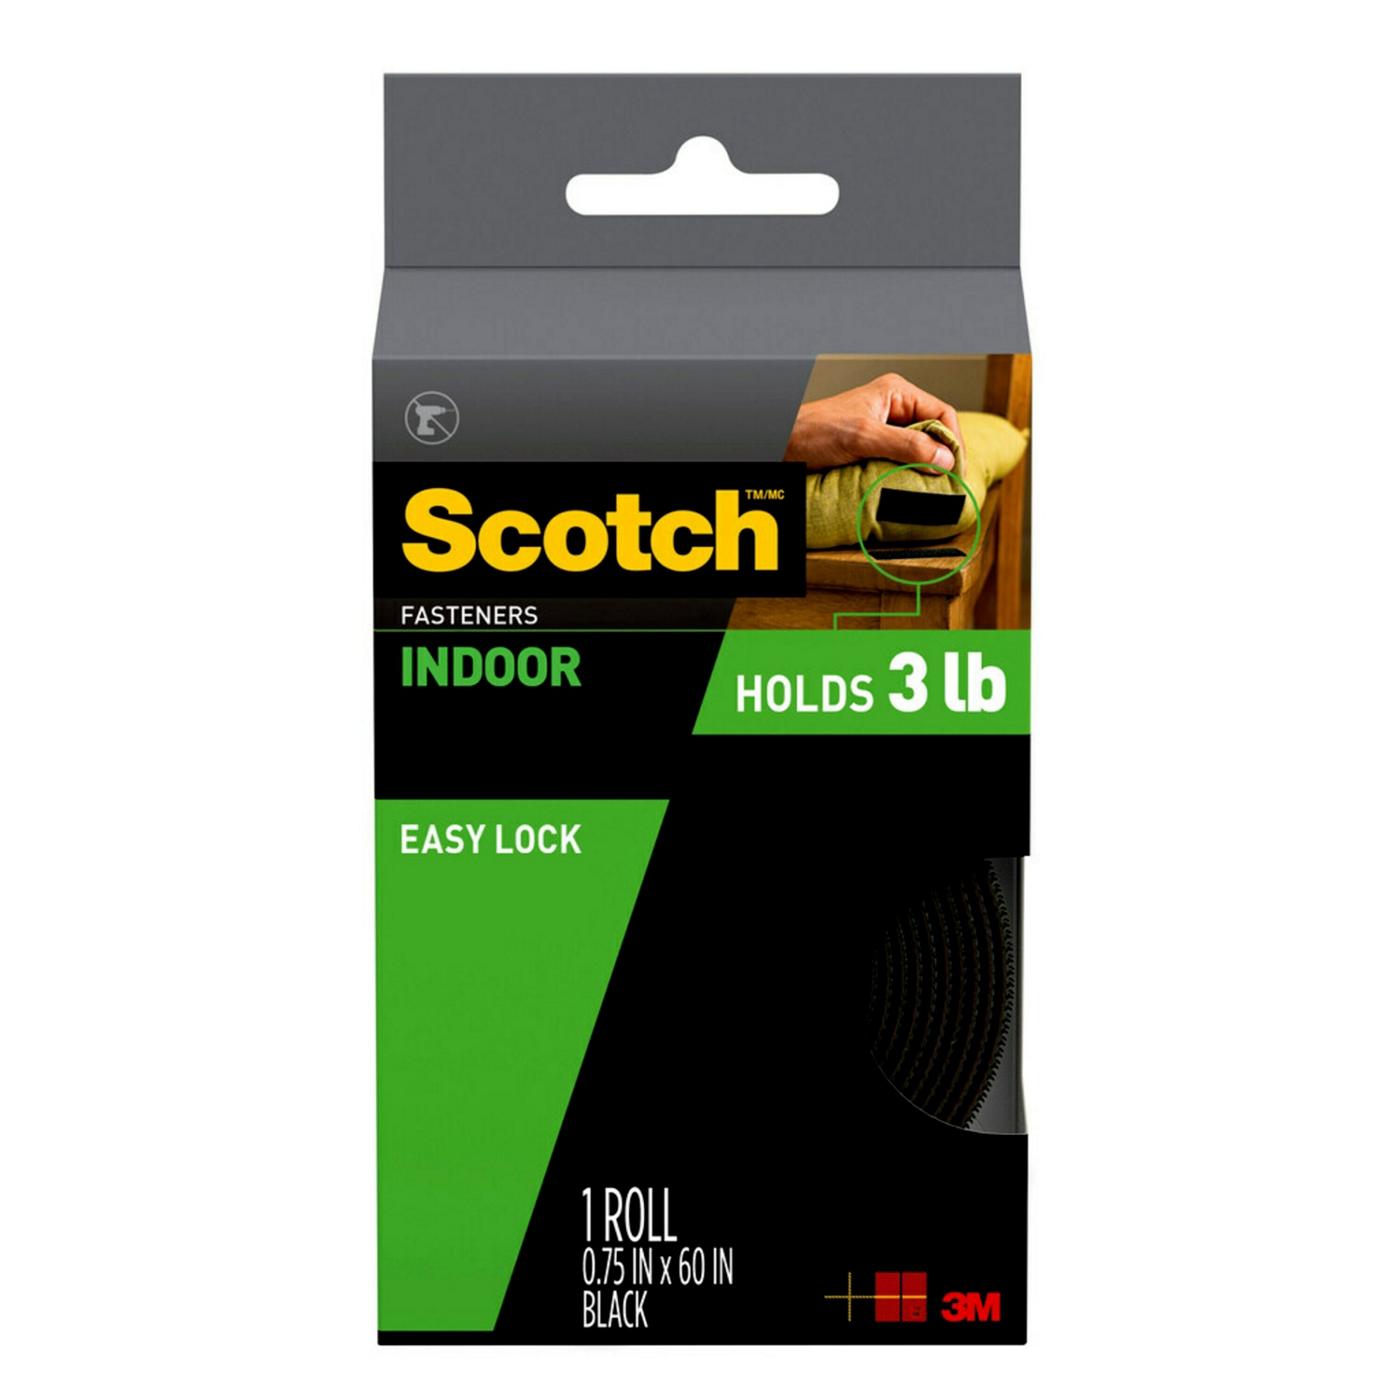 Scotch Indoor Fasteners Roll - Black; image 1 of 3